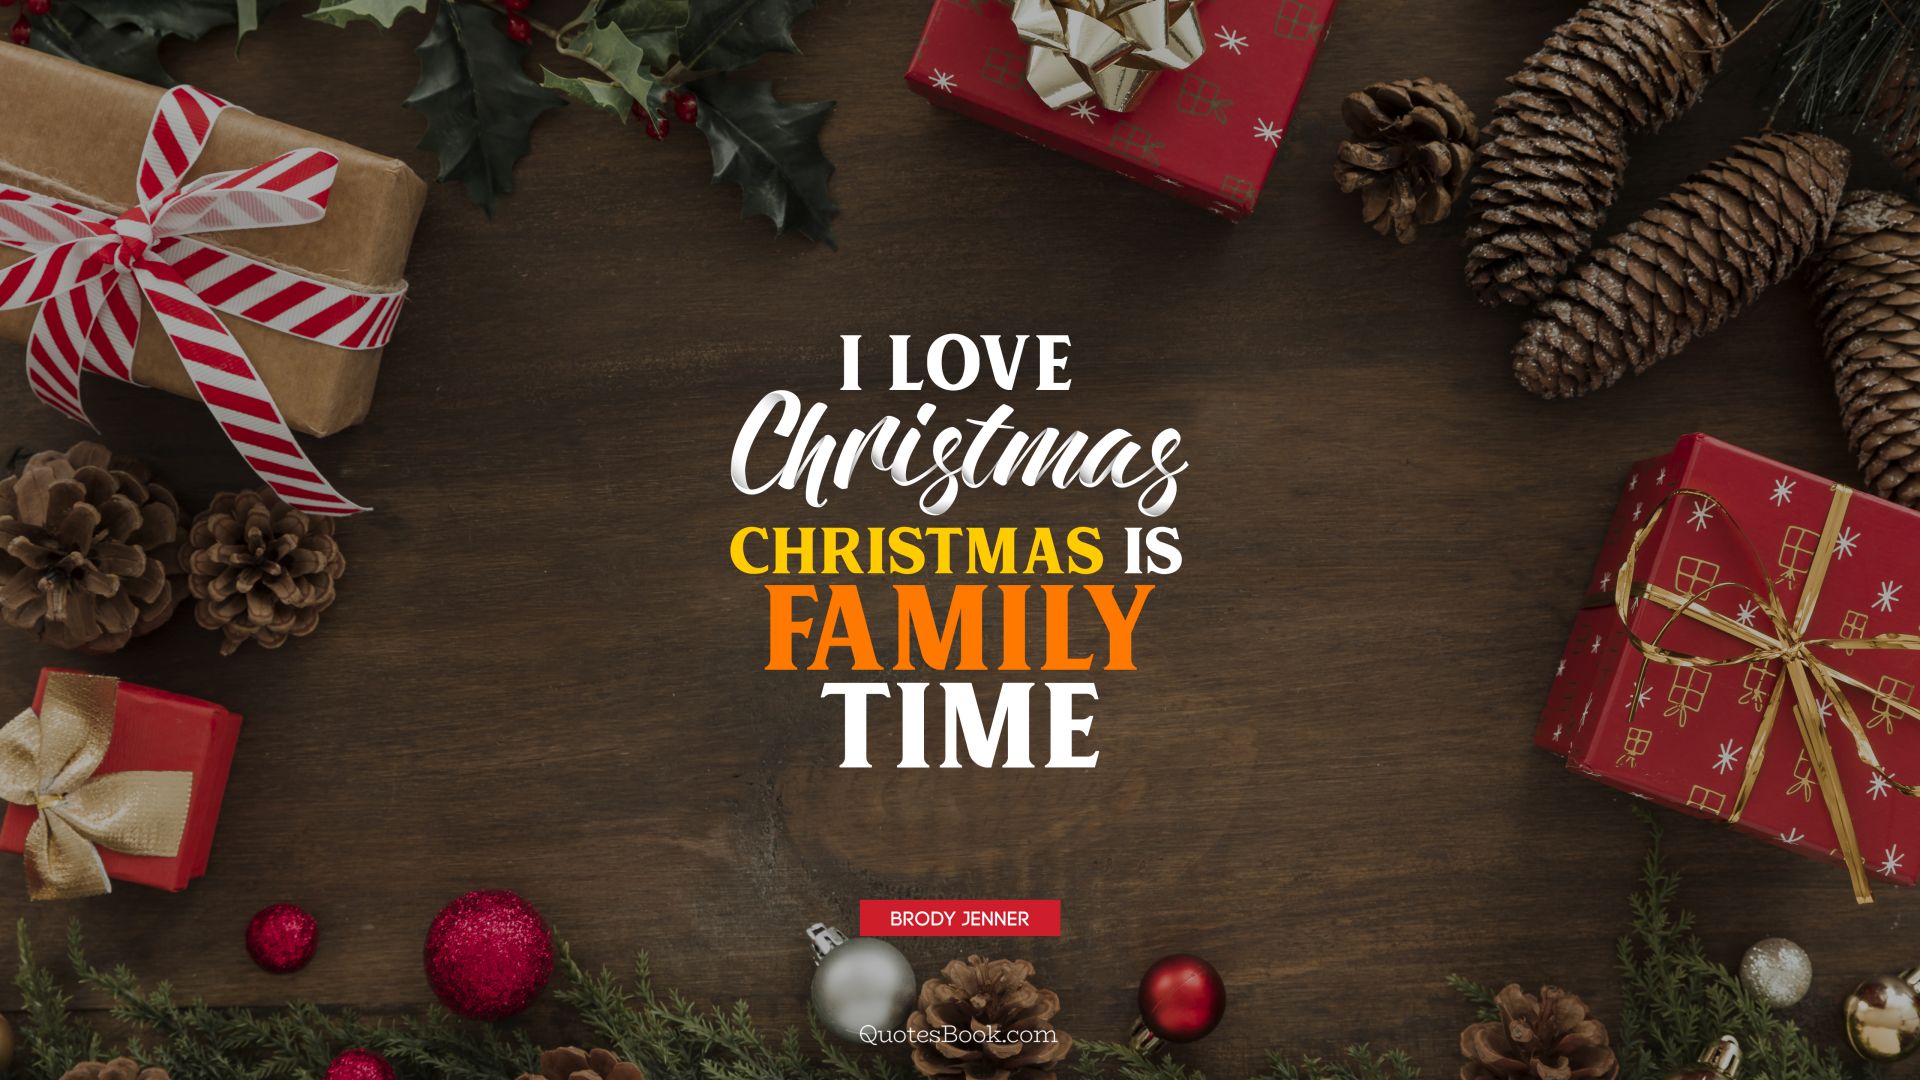 I love Christmas. Christmas is family time. - Quote by Brody Jenner